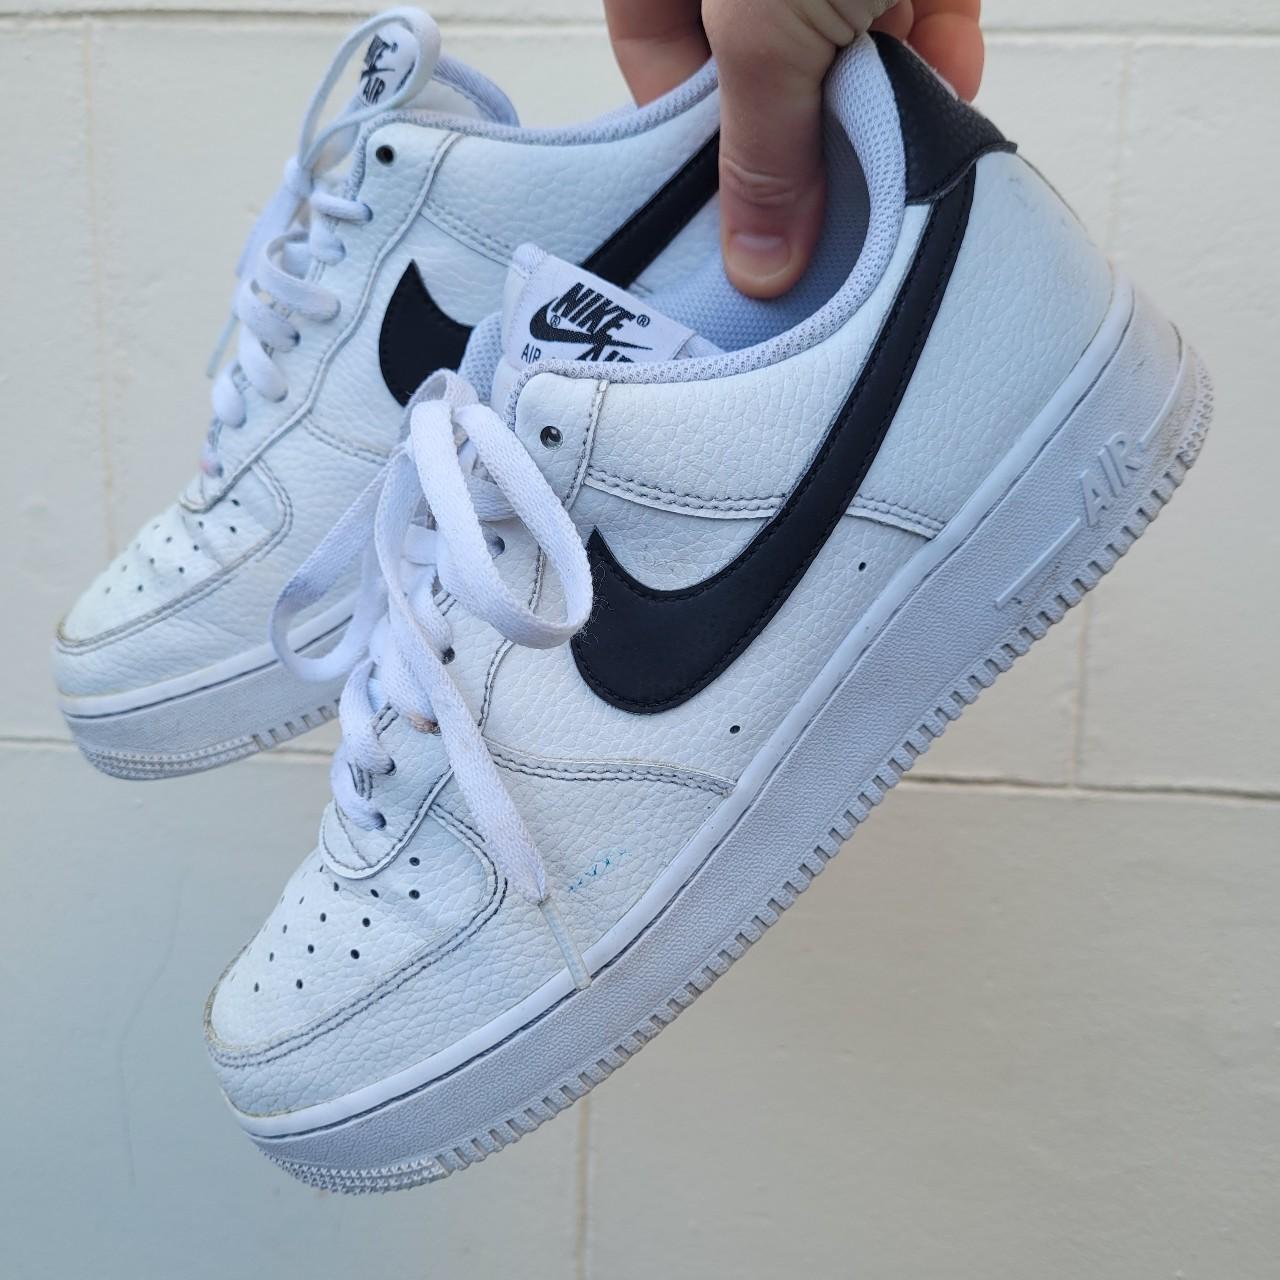 Nike Men's White and Black Trainers | Depop